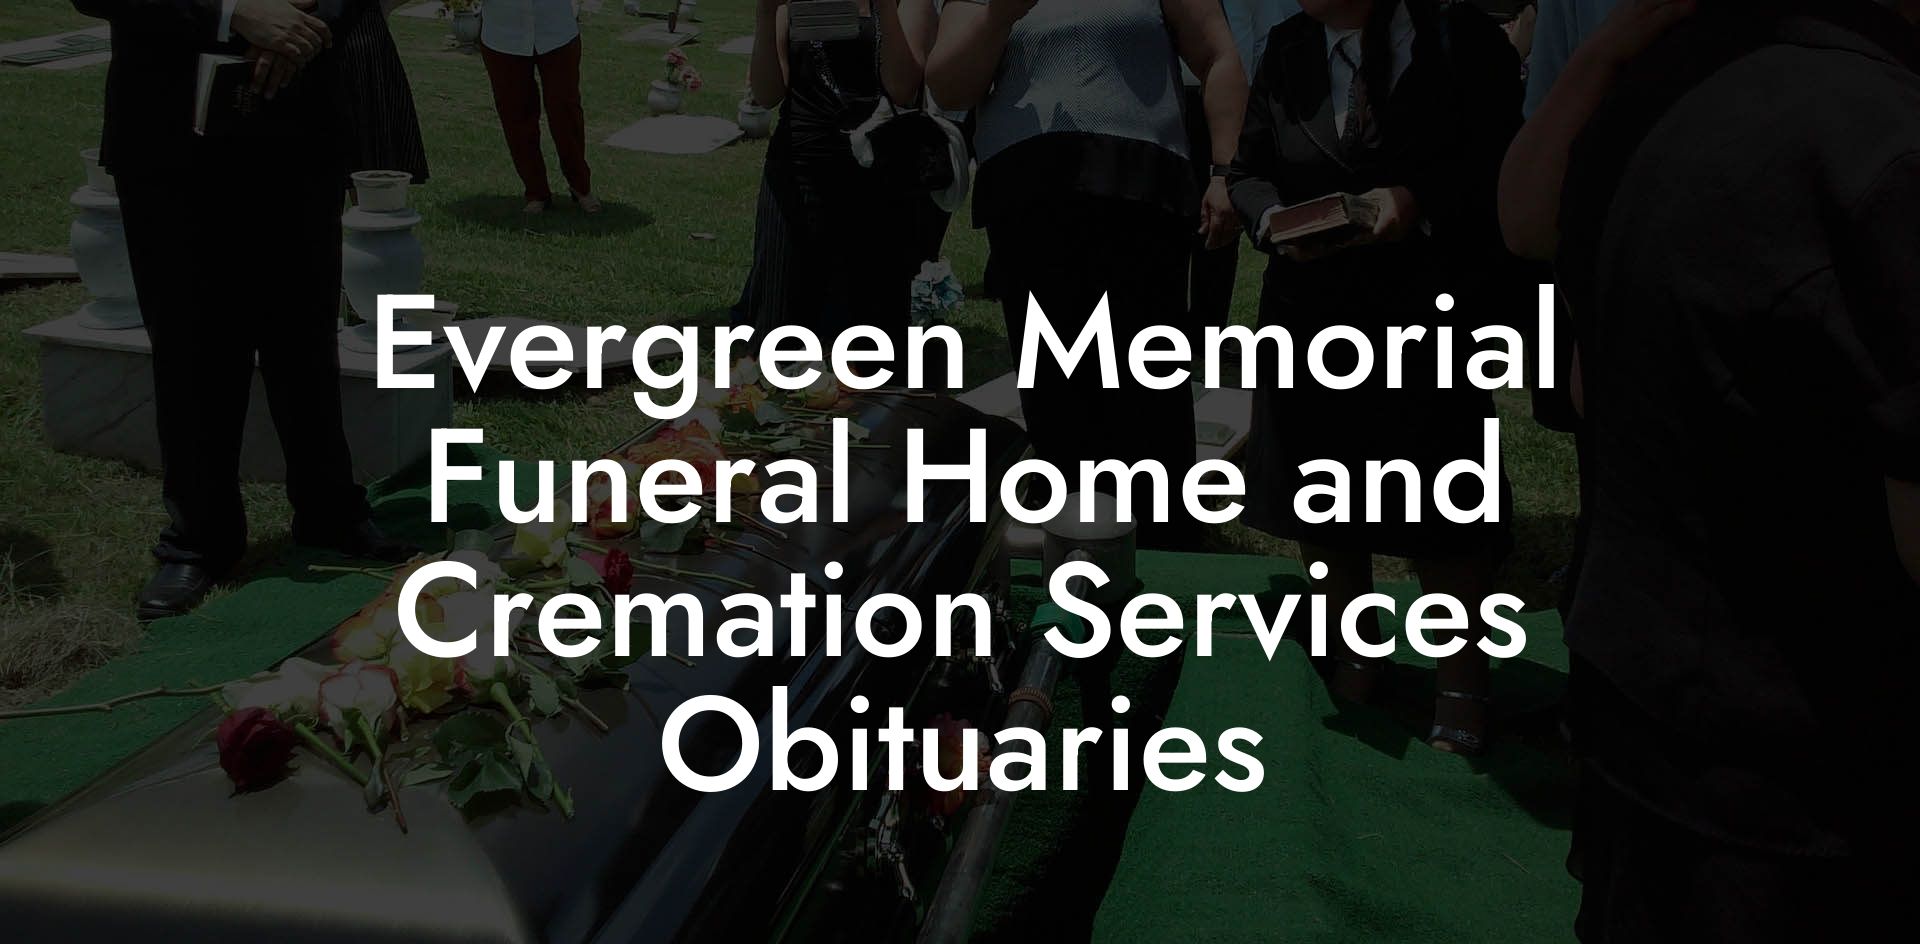 Evergreen Memorial Funeral Home and Cremation Services Obituaries